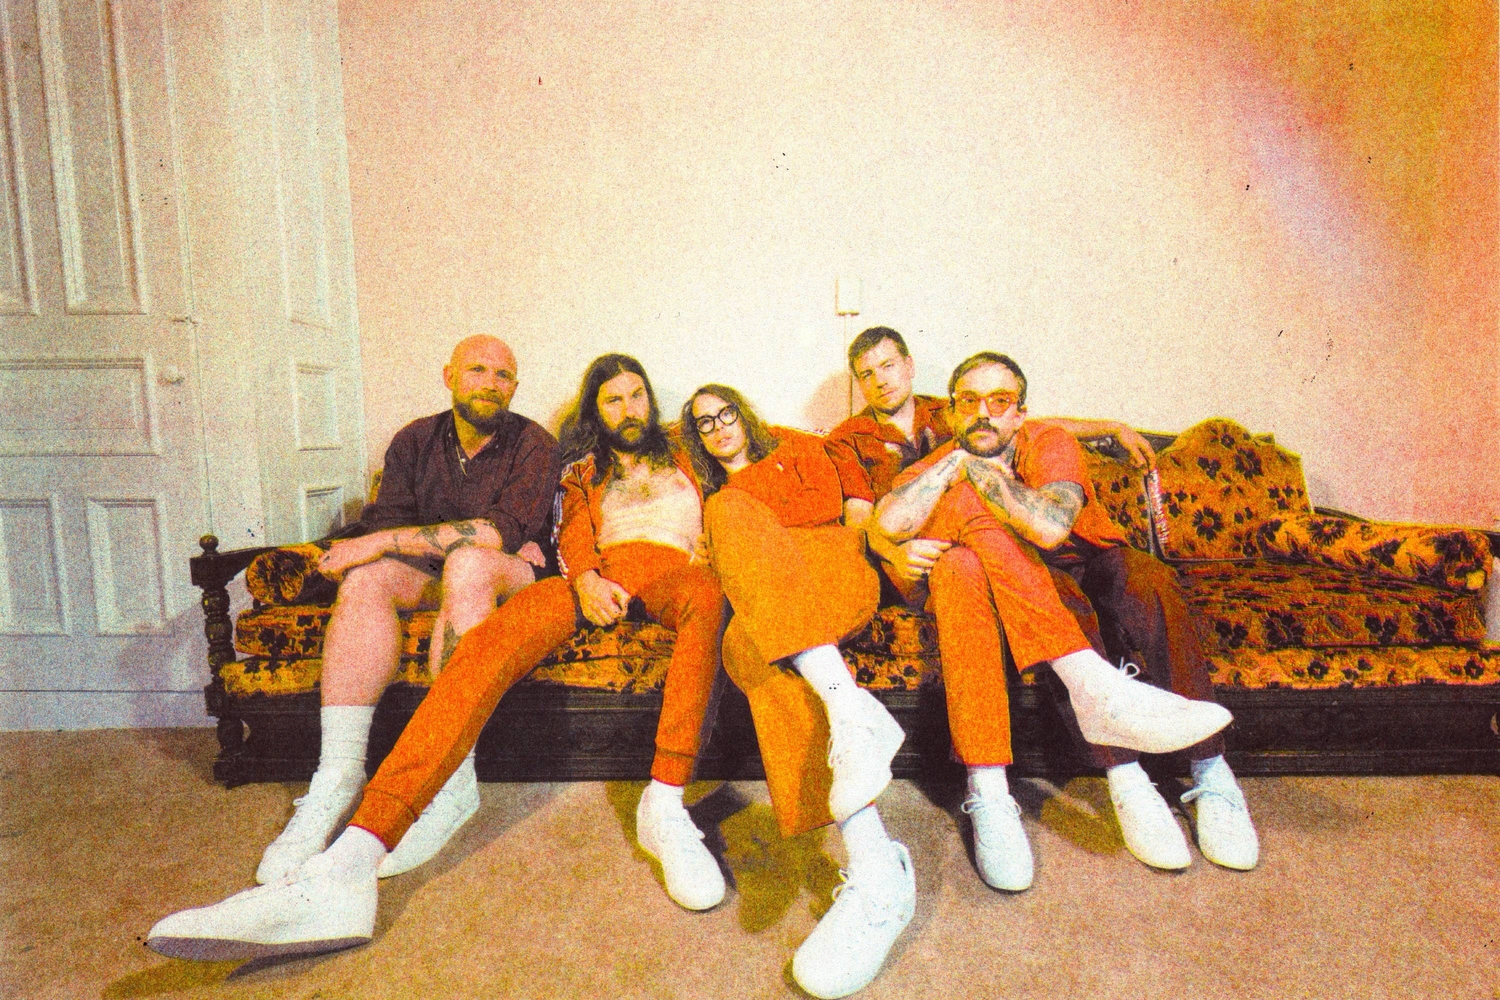 IDLES talk love, self-reflection and their fifth album 'TANGK'